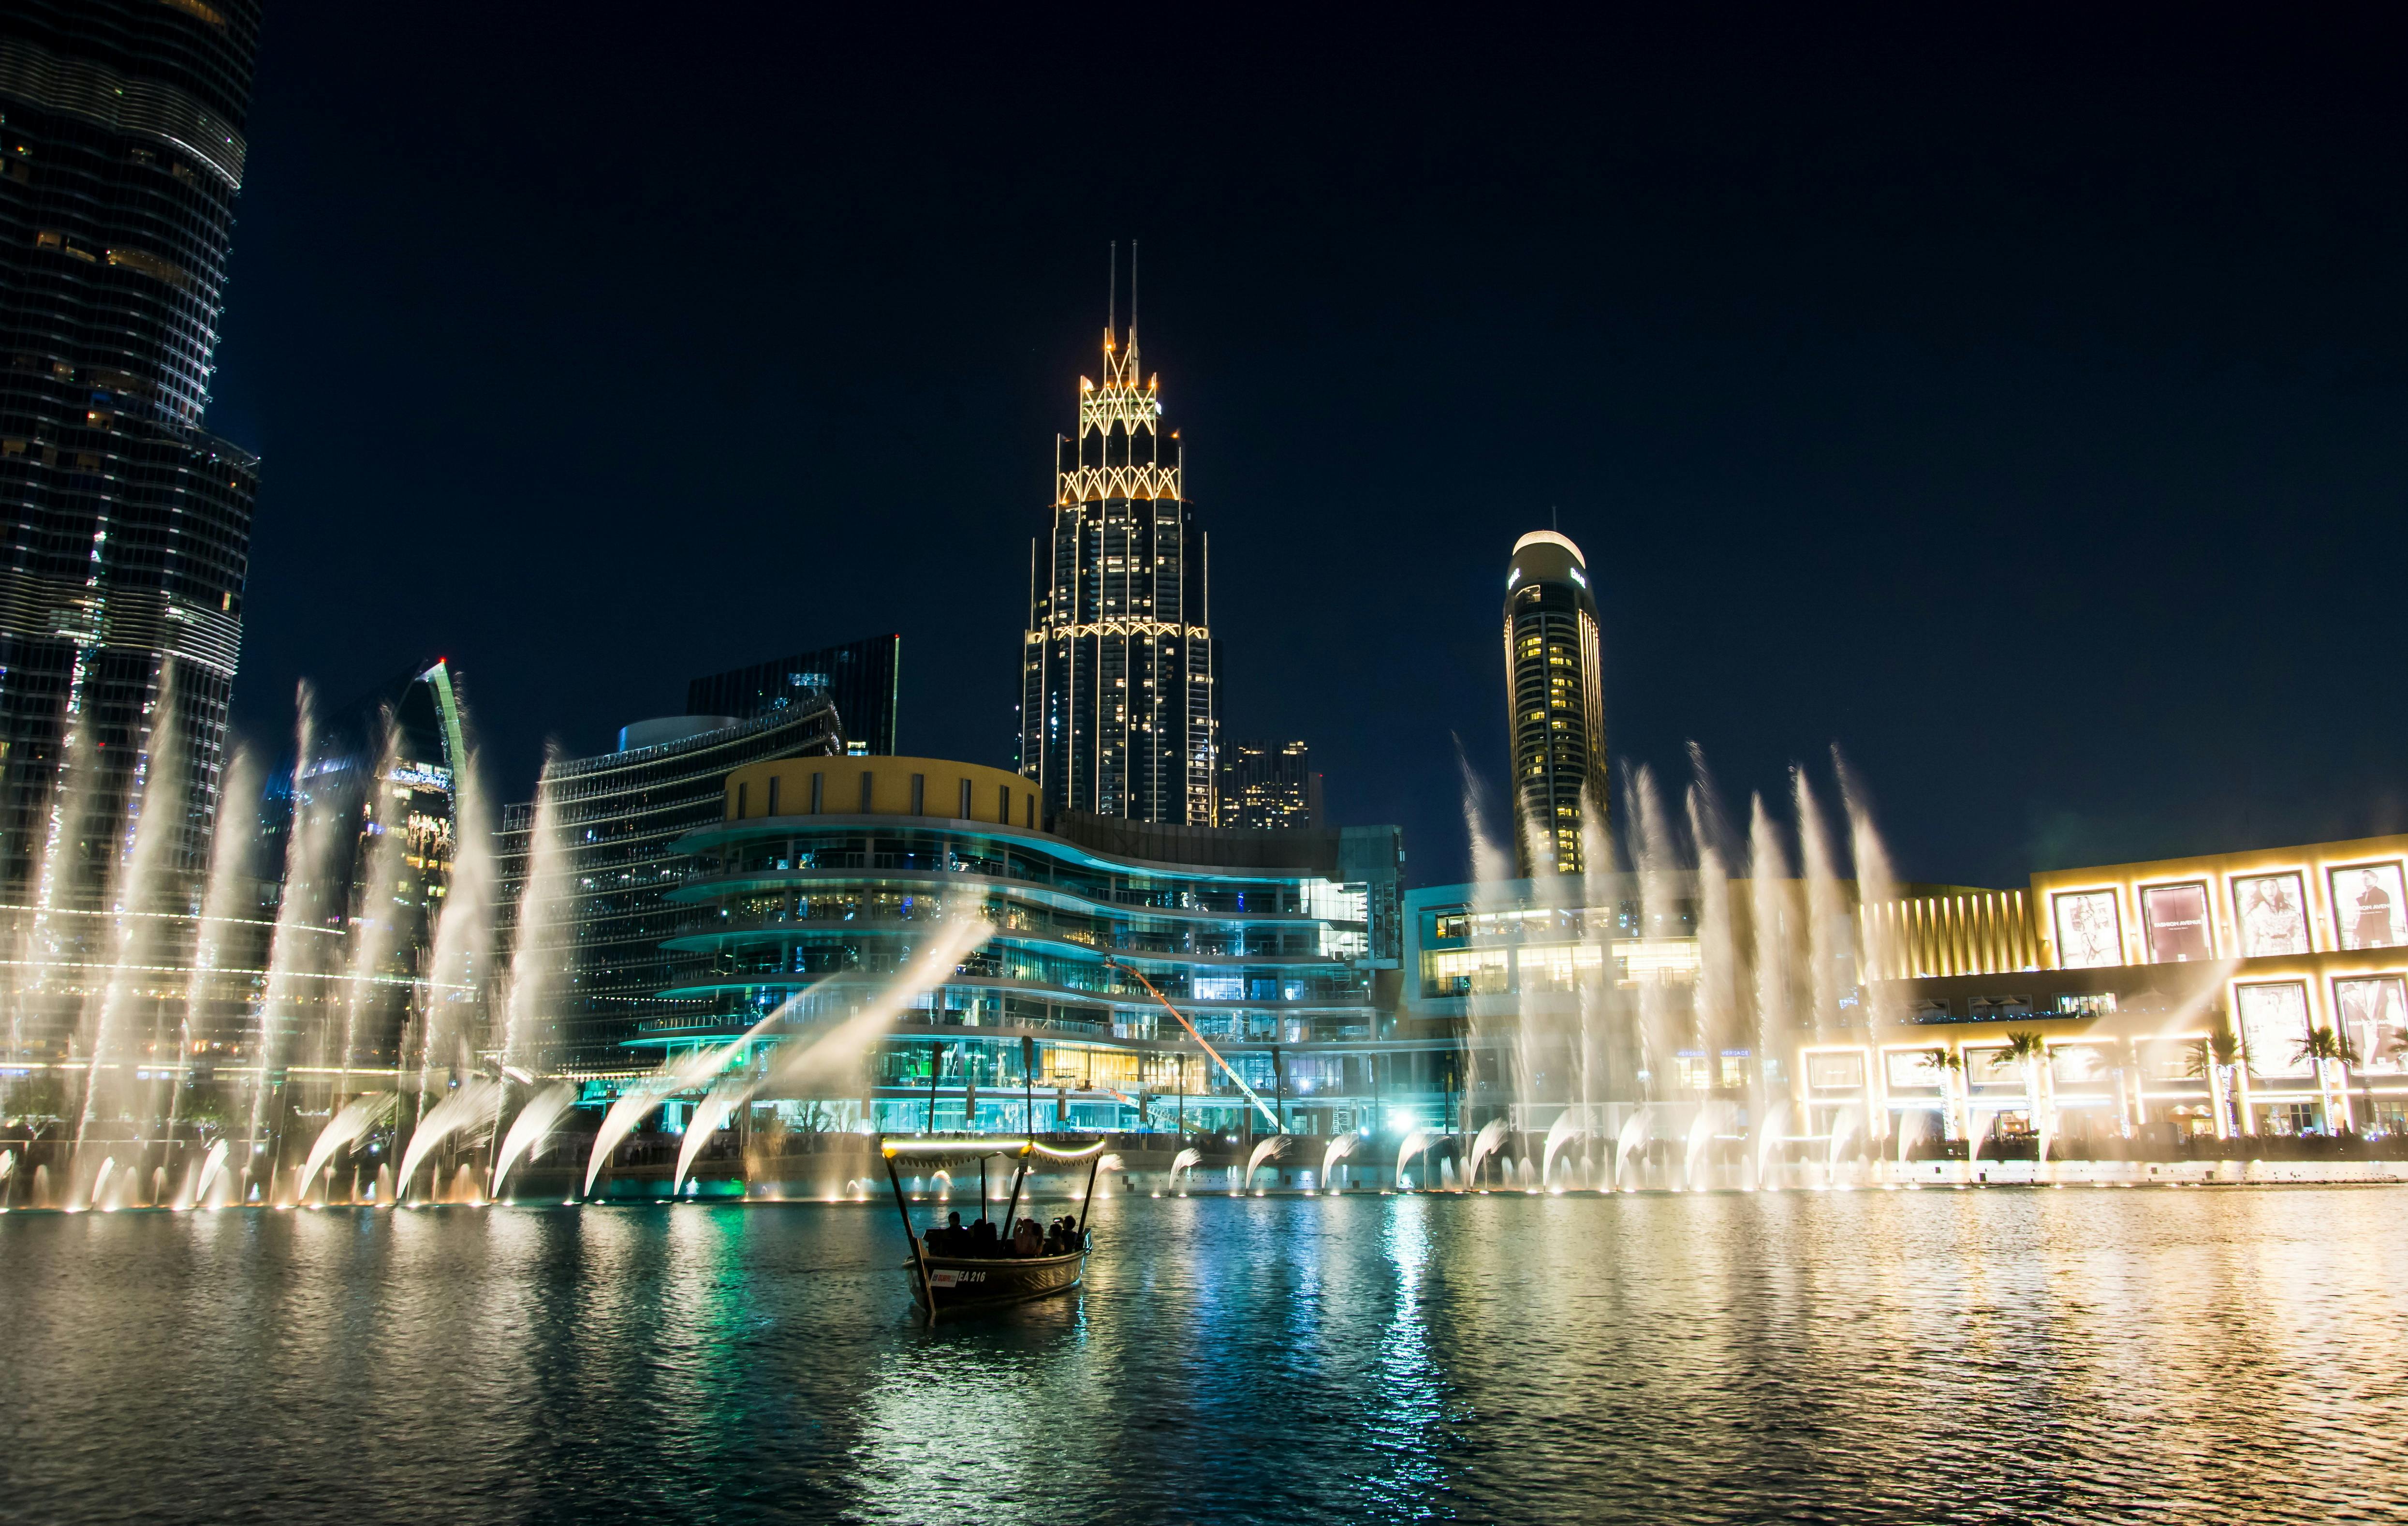 Full day private tour in Dubai with The Palm fountain show Musement